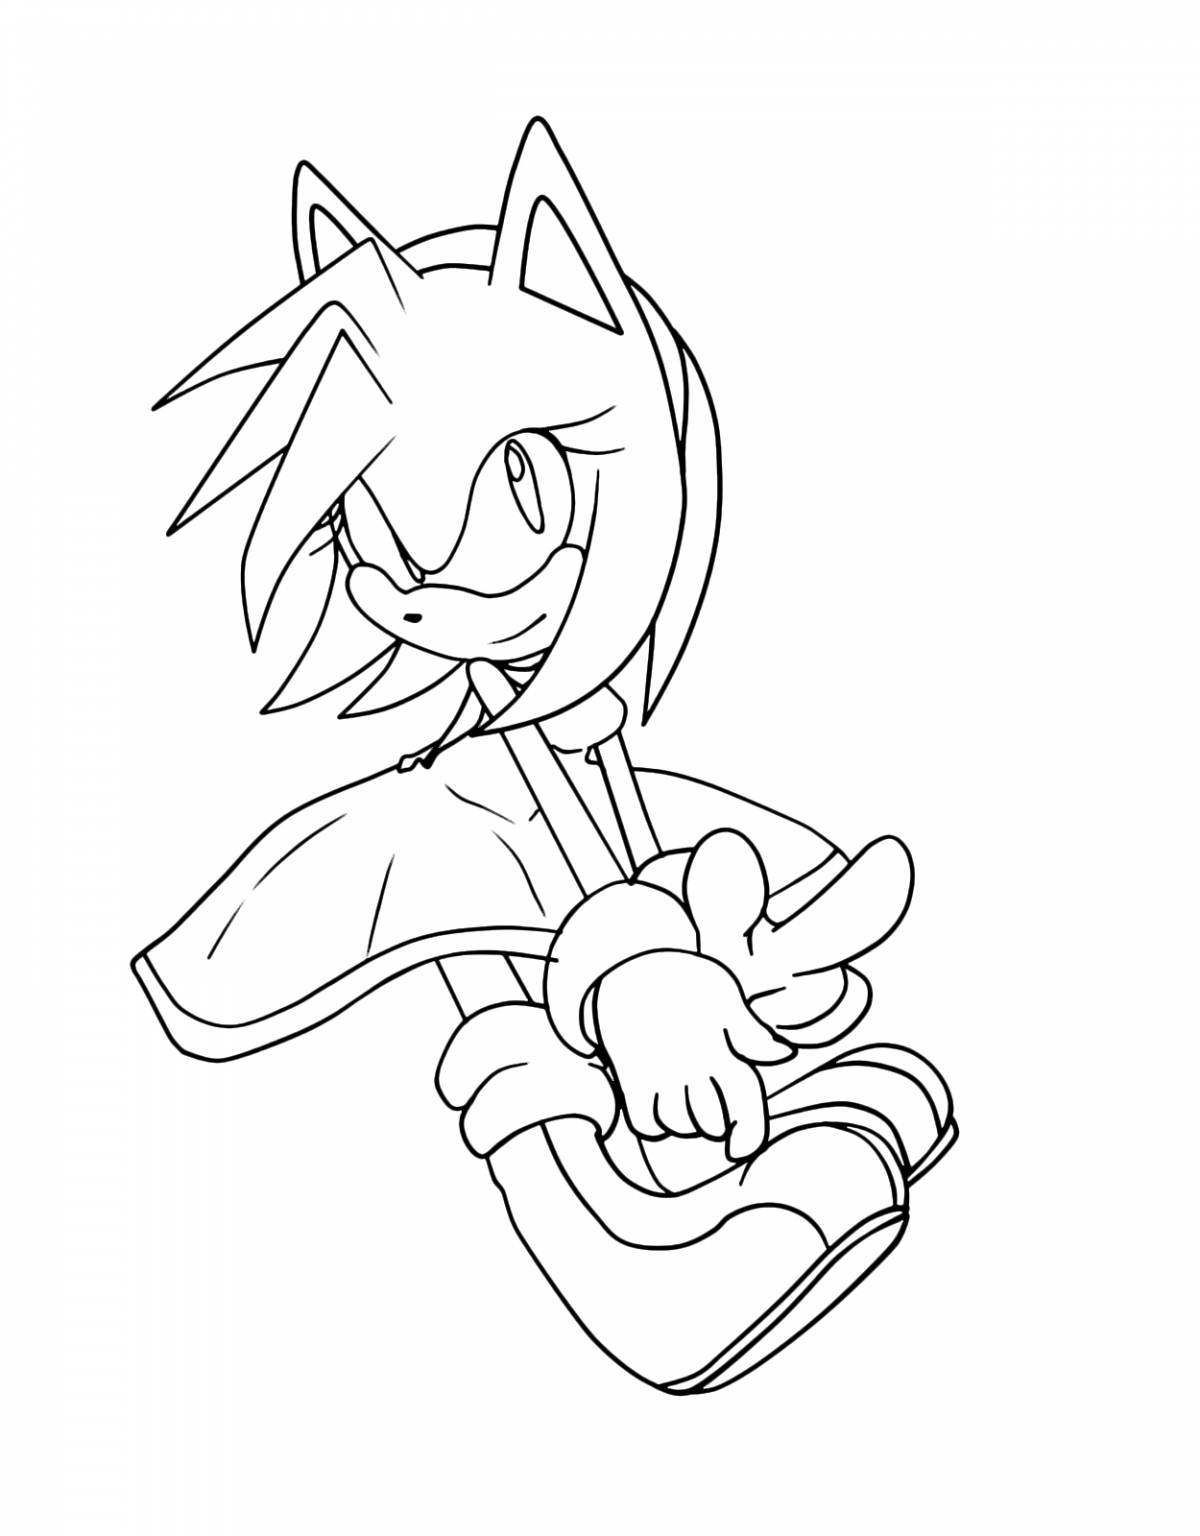 Coloring bright amy rose